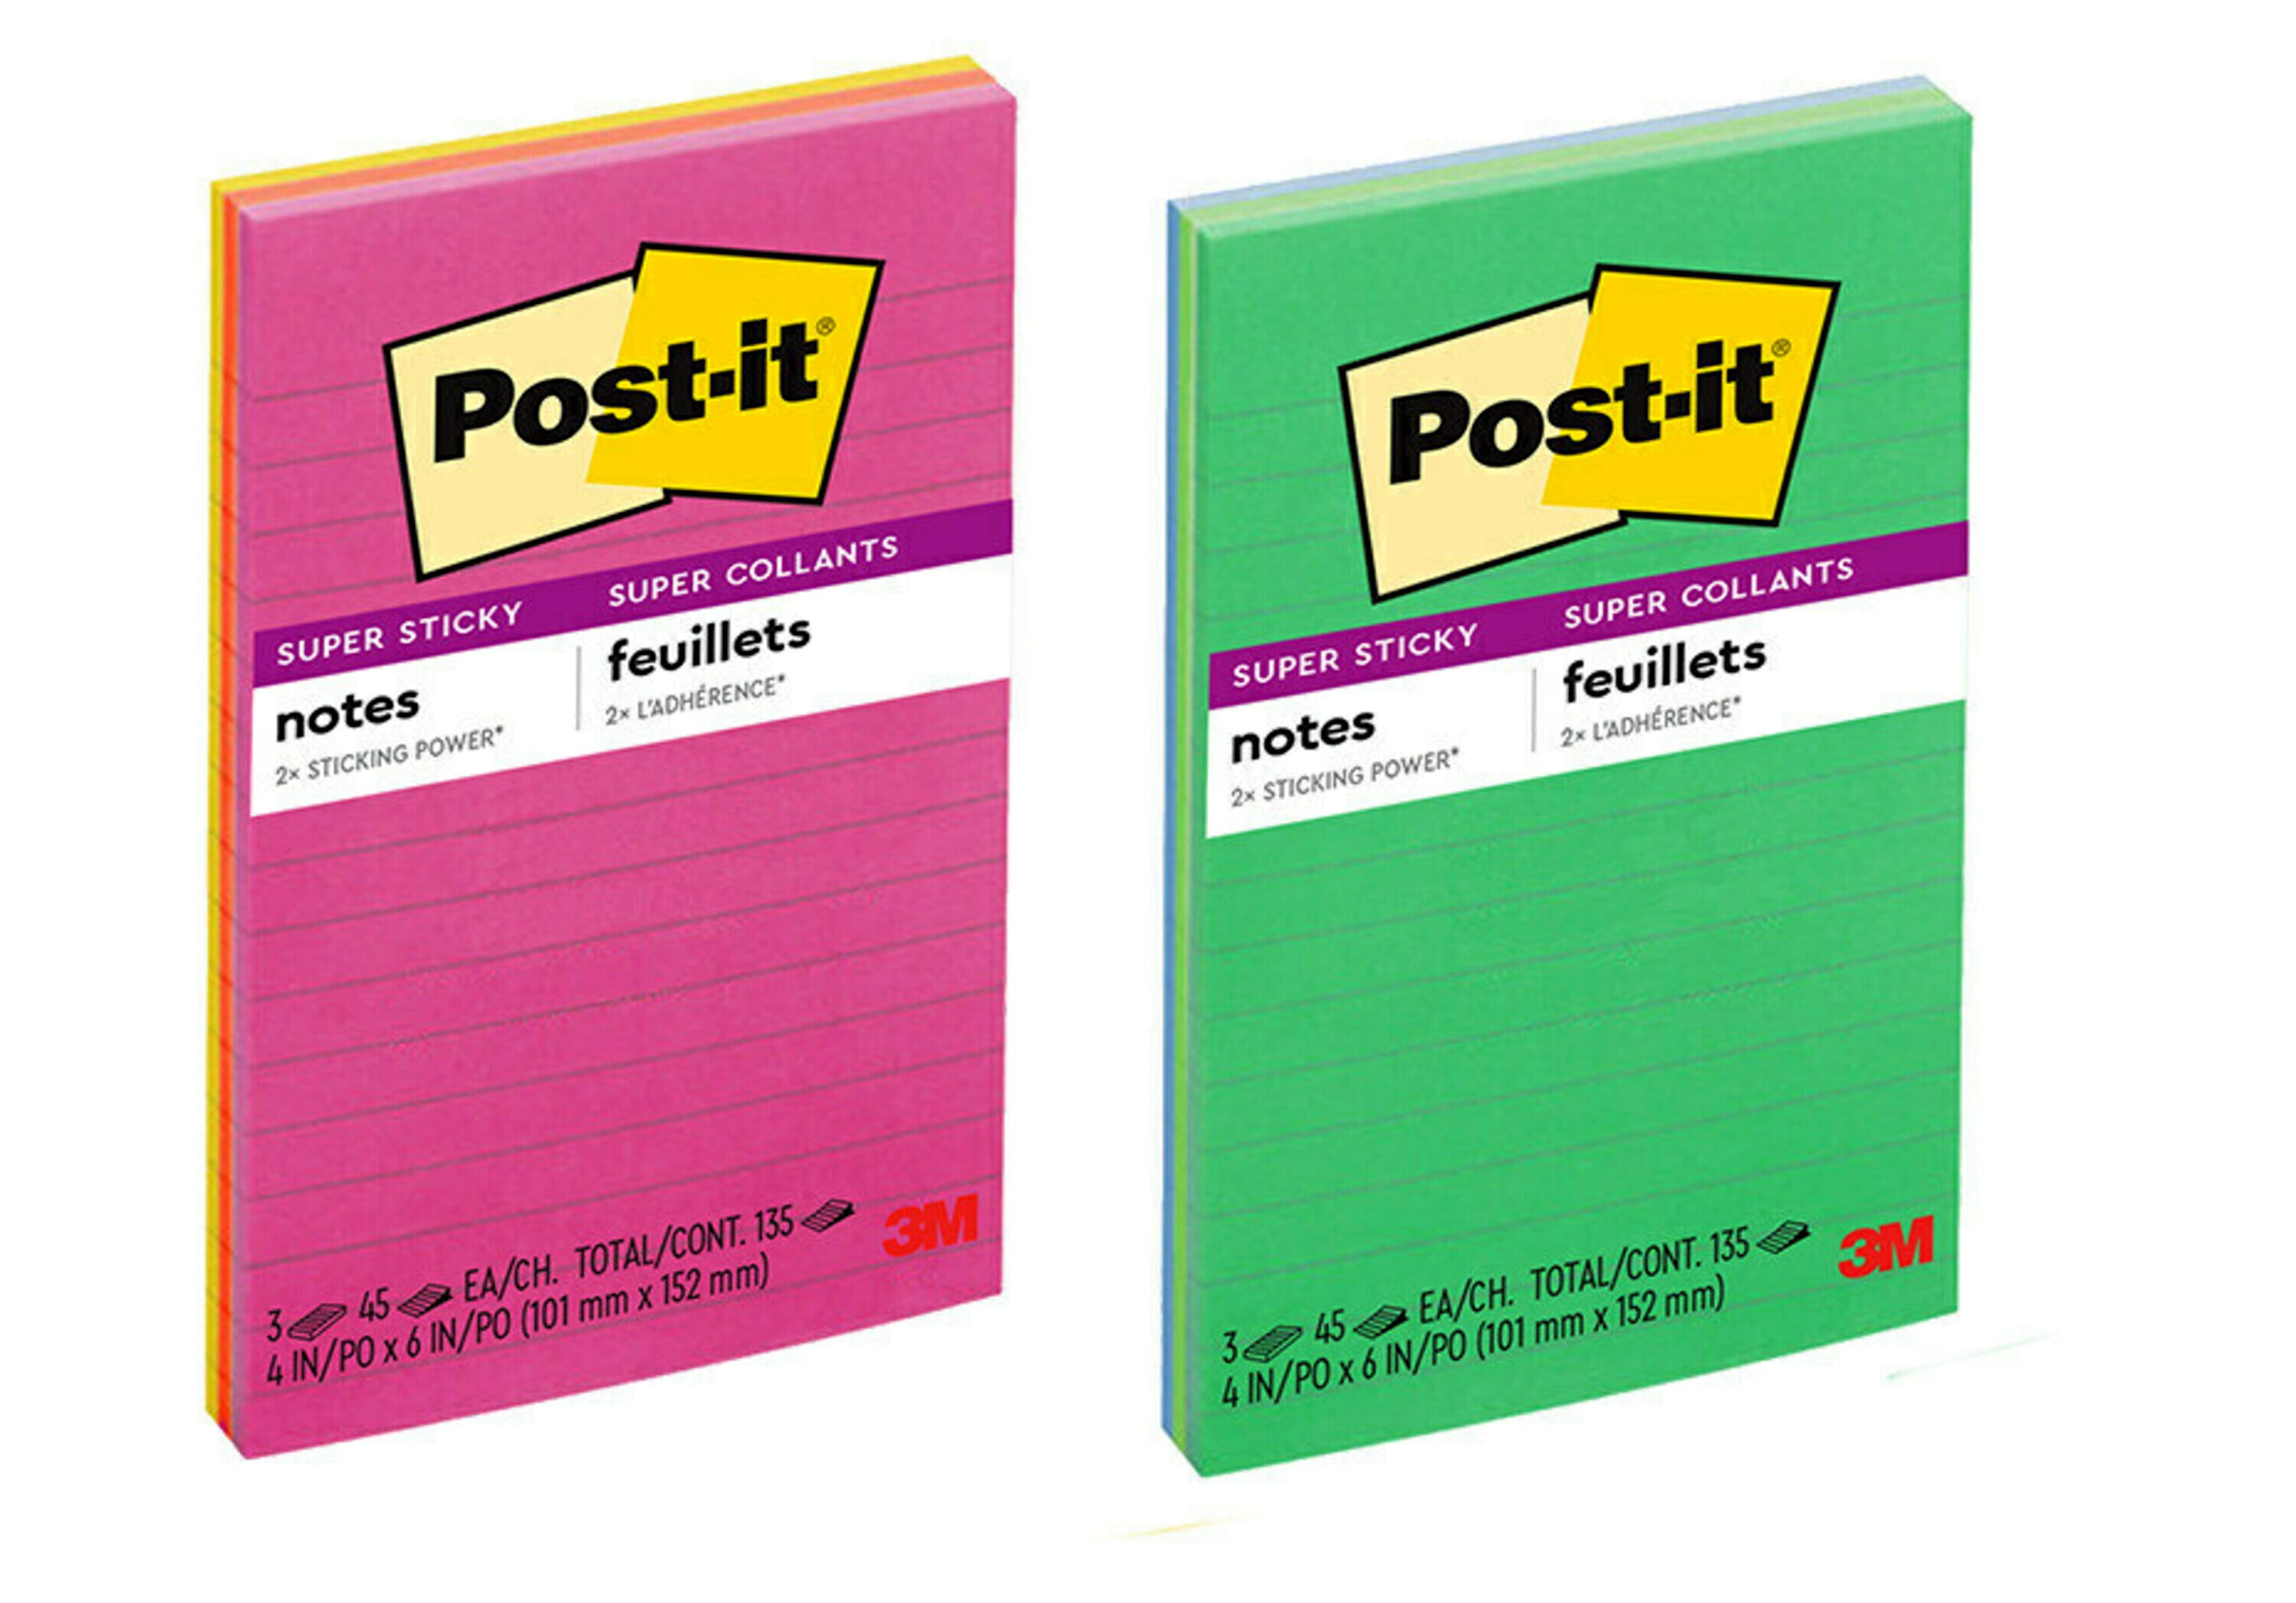 Post-It Notes 3M PURPLE 90 101 x 101 mm Super Sticky Ruled Lined  Note Pad NEW